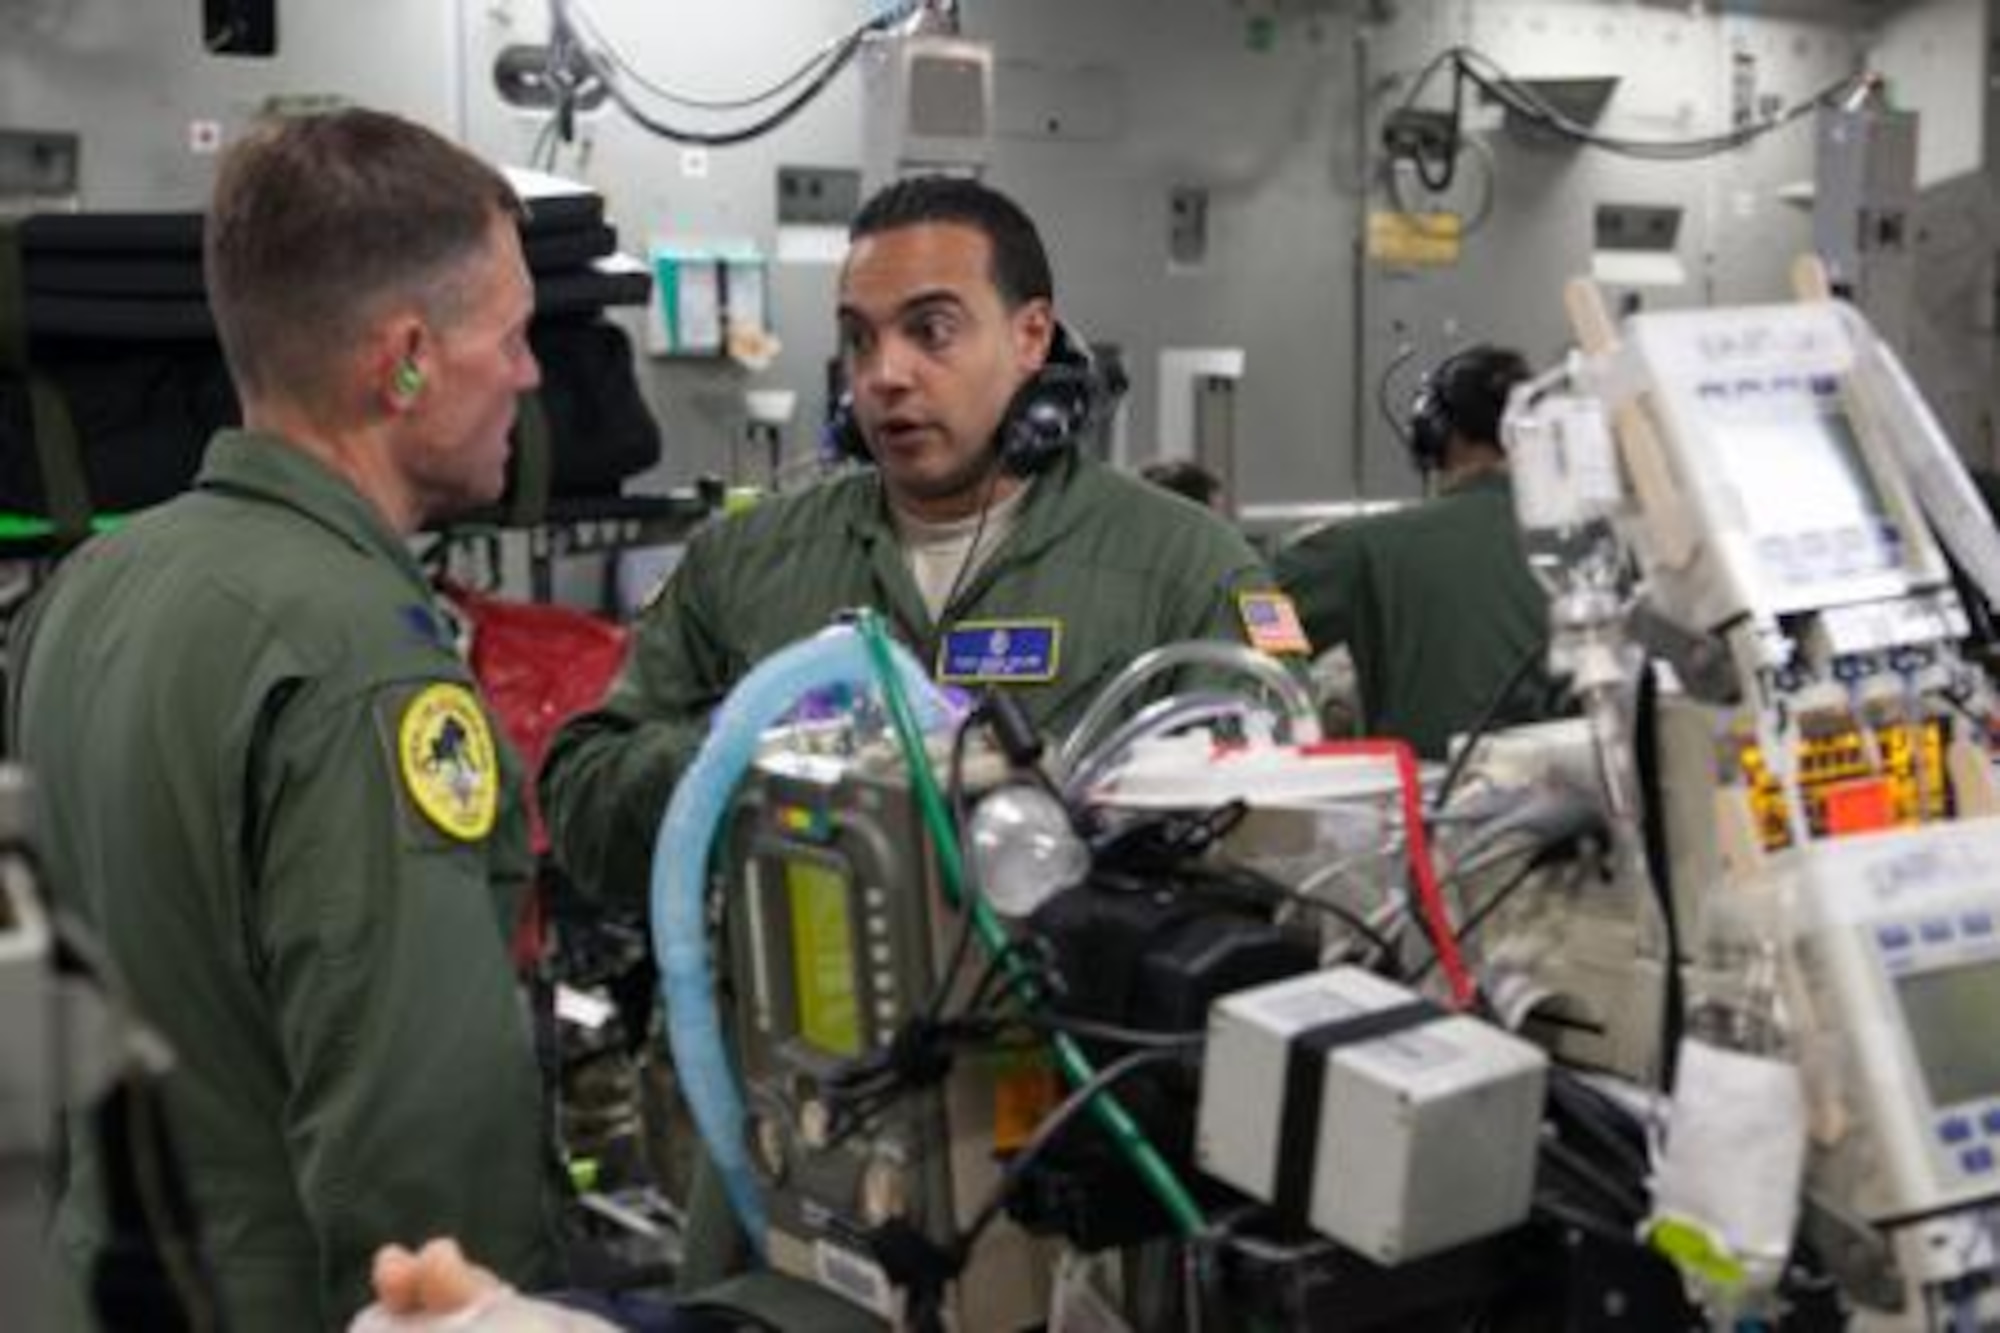 Lt. Col. Patrick Johannes, left, and Tech. Sgt. Eddie Colon, both assigned to the 10th Expeditionary Aeromedical Evacuation Flight, discuss a patient's care during a flight from Ramstein Air Base, Germany, July 4, 2014. Johaness and Colon are members of a Critical Care Air Transport Team. (U.S. Air National Guard photo by Staff Sgt. Allan Eason/Released)



